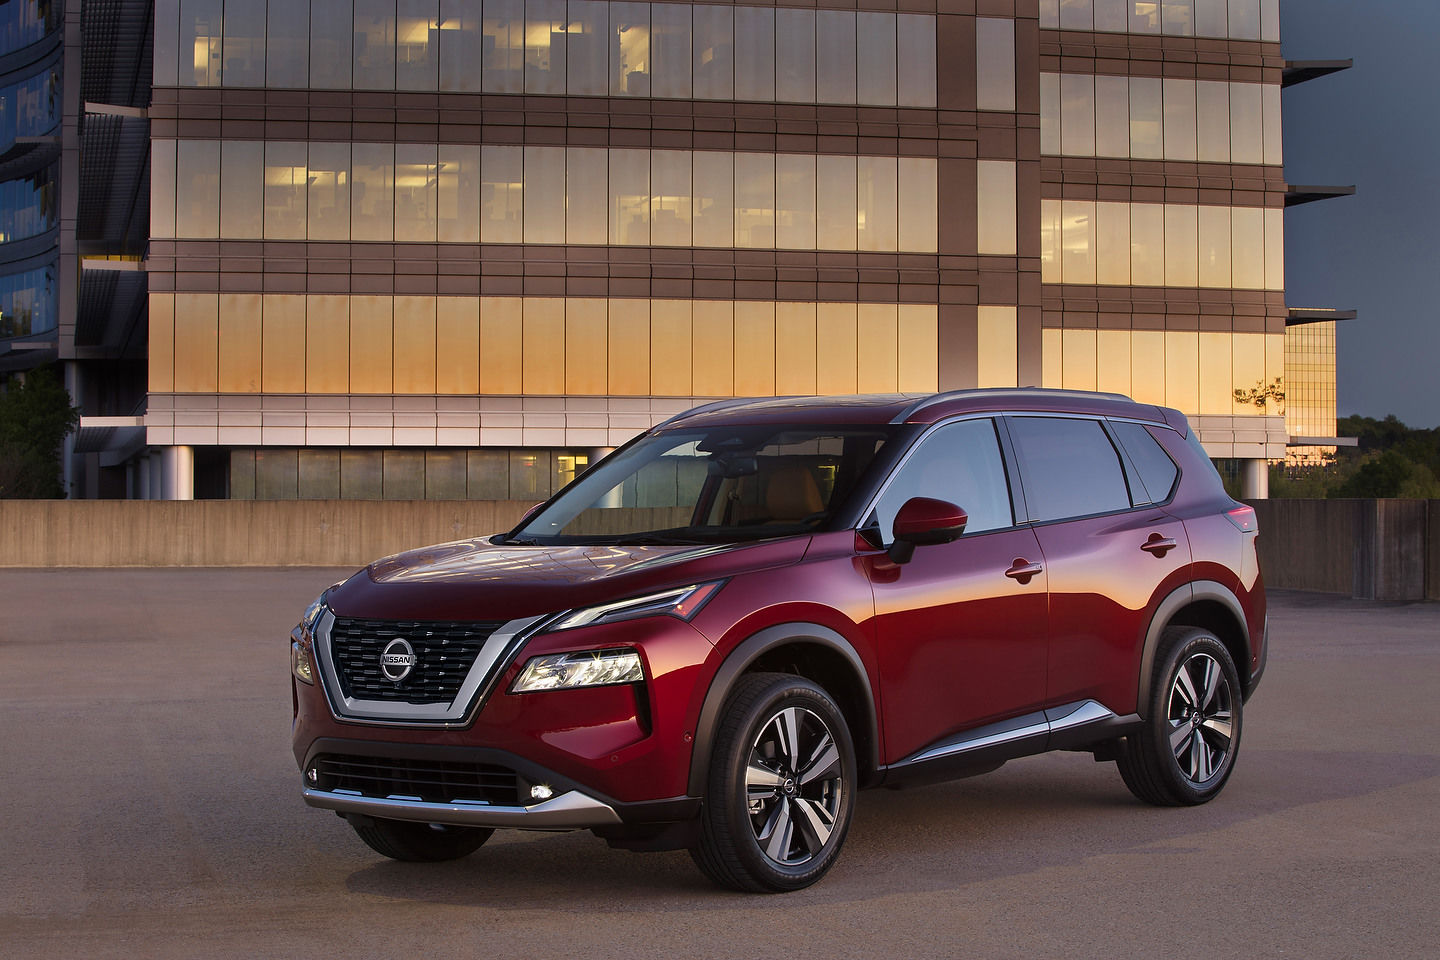 The features buyers love about the 2021 Nissan Rogue